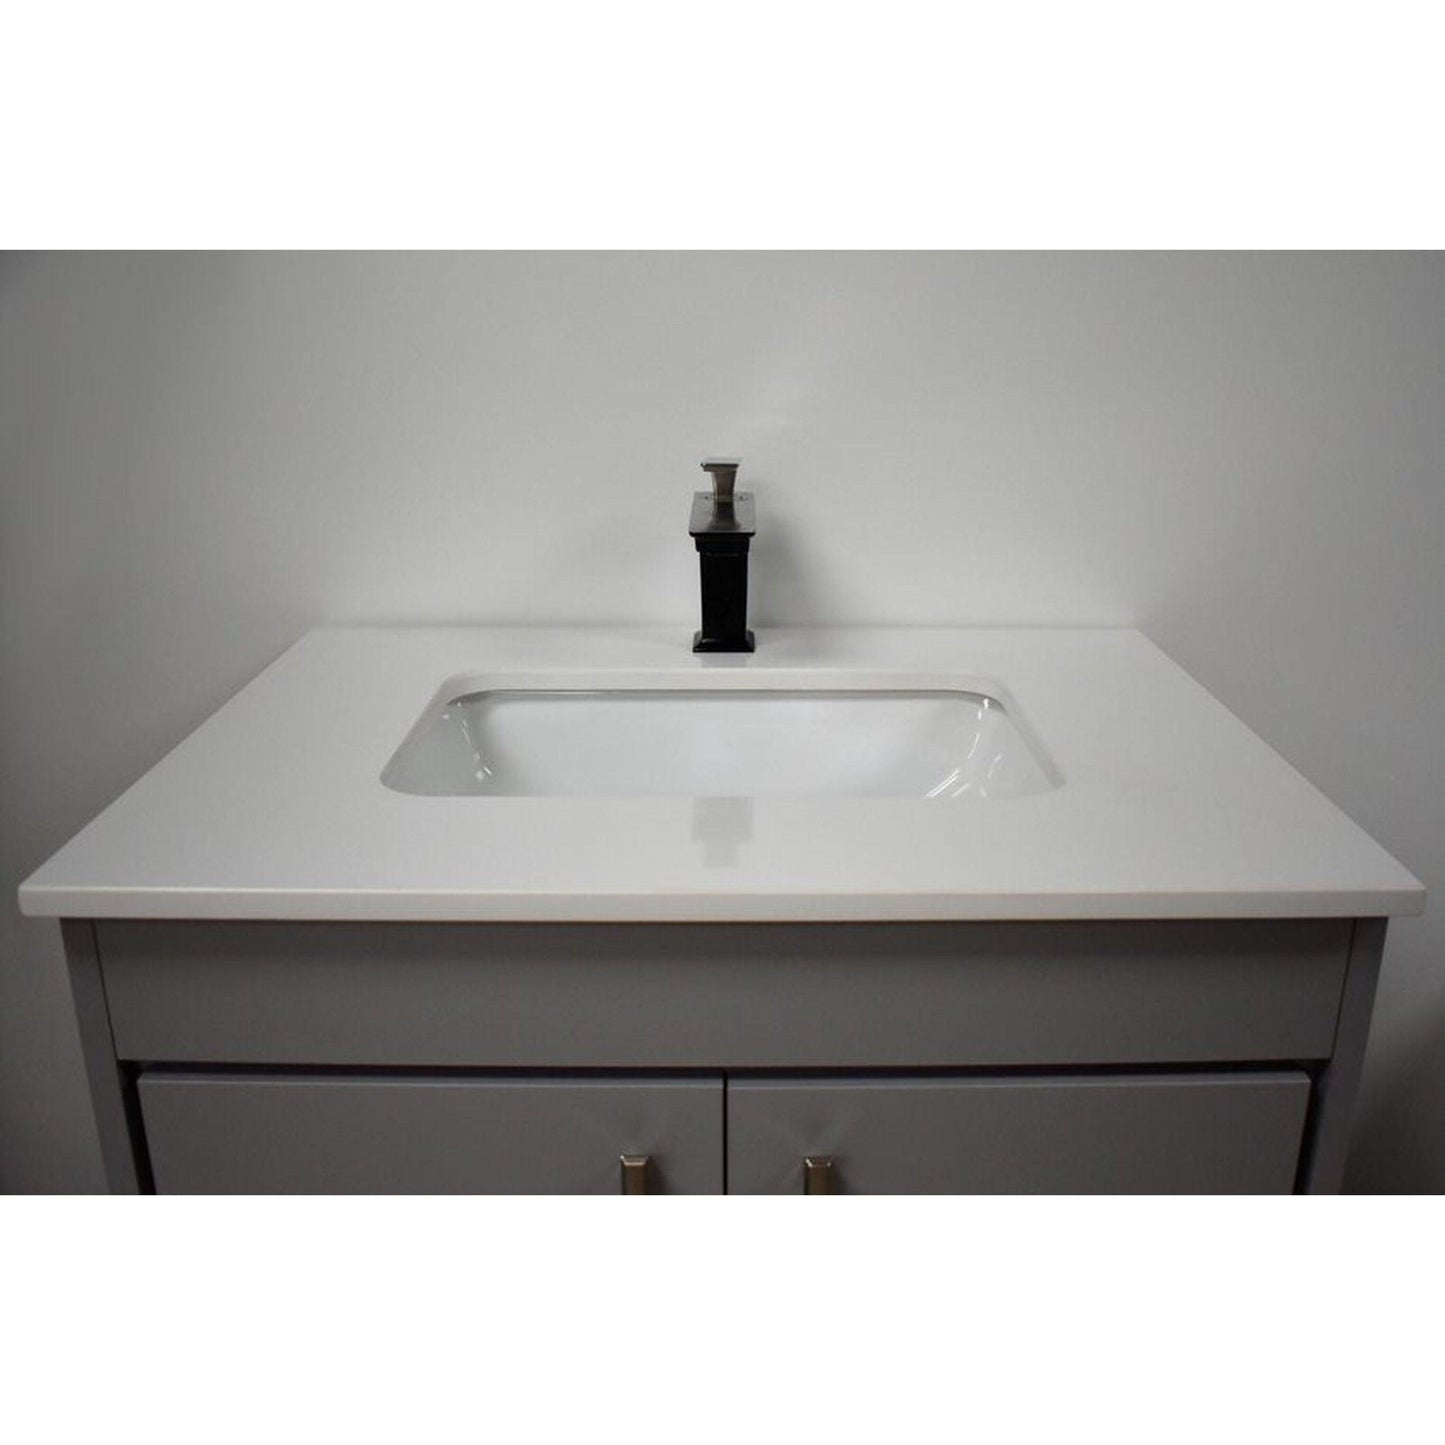 Volpa USA Capri 24" x 22" Gray Freestanding Modern Bathroom Vanity With Preinstalled Undermount Sink And White Microstone Top With Brushed Nickel Edge Handles